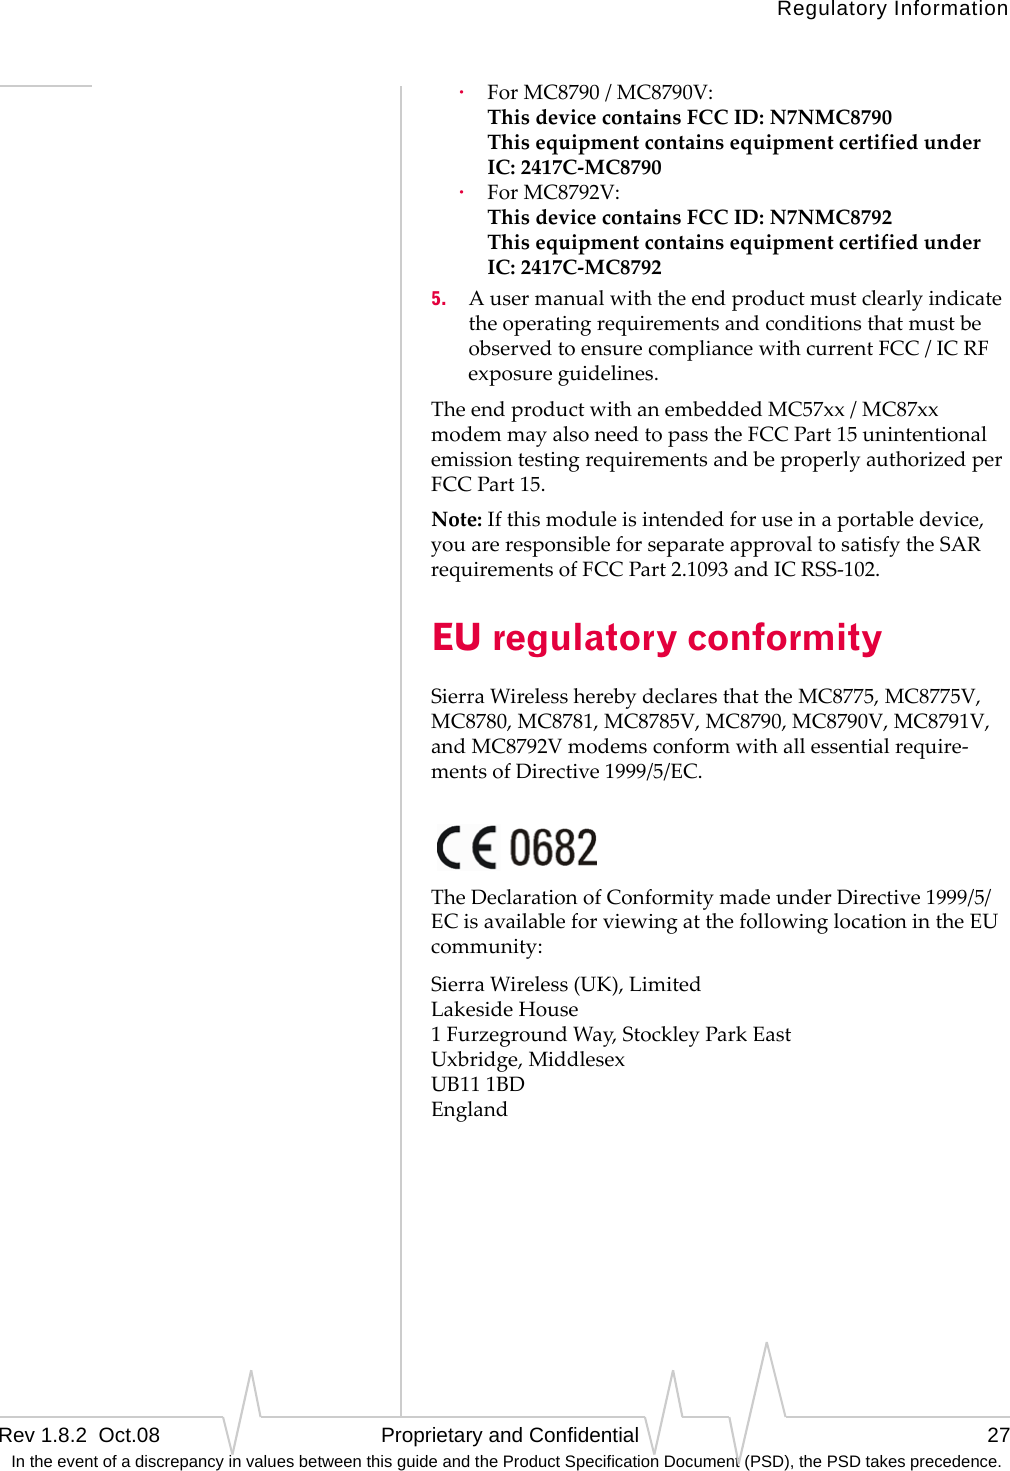 Regulatory InformationRev 1.8.2  Oct.08   Proprietary and Confidential 27 In the event of a discrepancy in values between this guide and the Product Specification Document (PSD), the PSD takes precedence.·ForMC8790/MC8790V: ThisdevicecontainsFCCID:N7NMC8790 ThisequipmentcontainsequipmentcertifiedunderIC:2417C‐MC8790·ForMC8792V: ThisdevicecontainsFCCID:N7NMC8792 ThisequipmentcontainsequipmentcertifiedunderIC:2417C‐MC87925. AusermanualwiththeendproductmustclearlyindicatetheoperatingrequirementsandconditionsthatmustbeobservedtoensurecompliancewithcurrentFCC/ICRFexposureguidelines.TheendproductwithanembeddedMC57xx/MC87xxmodemmayalsoneedtopasstheFCCPart15unintentionalemissiontestingrequirementsandbeproperlyauthorizedperFCCPart15.Note:Ifthismoduleisintendedforuseinaportabledevice,youareresponsibleforseparateapprovaltosatisfytheSARrequirementsofFCCPart2.1093andICRSS‐102.EU regulatory conformitySierraWirelessherebydeclaresthattheMC8775,MC8775V,MC8780,MC8781,MC8785V,MC8790,MC8790V,MC8791V,andMC8792Vmodemsconformwithallessentialrequire‐mentsofDirective1999/5/EC.TheDeclarationofConformitymadeunderDirective1999/5/ECisavailableforviewingatthefollowinglocationintheEUcommunity:SierraWireless(UK),Limited LakesideHouse 1FurzegroundWay,StockleyParkEast Uxbridge,Middlesex UB111BD England